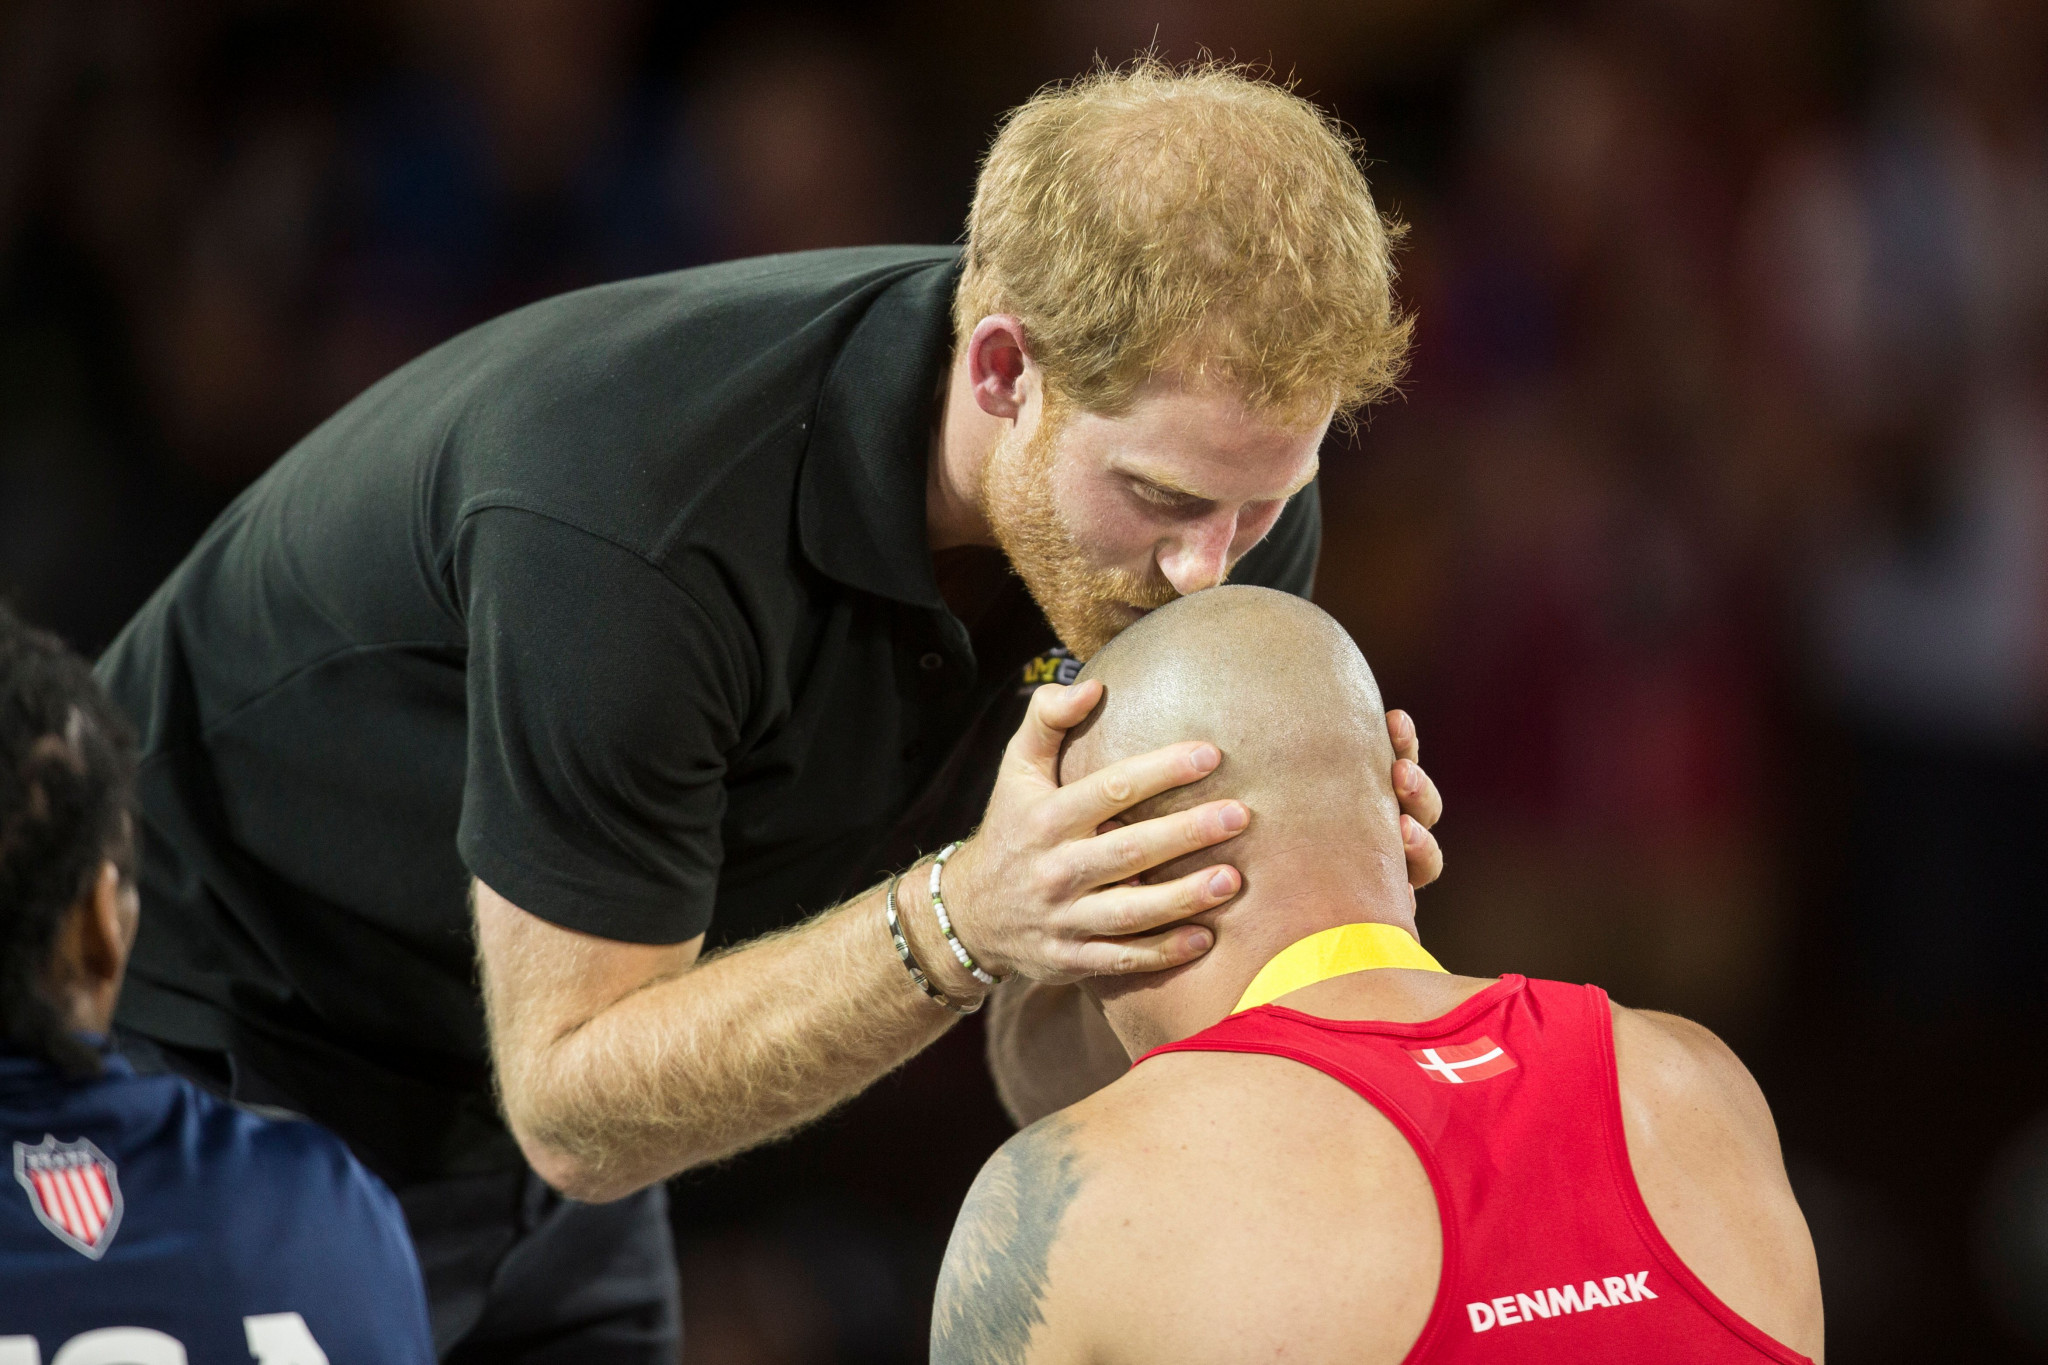 Düsseldorf 2022 Invictus Games a perfect fit for Prince Harry